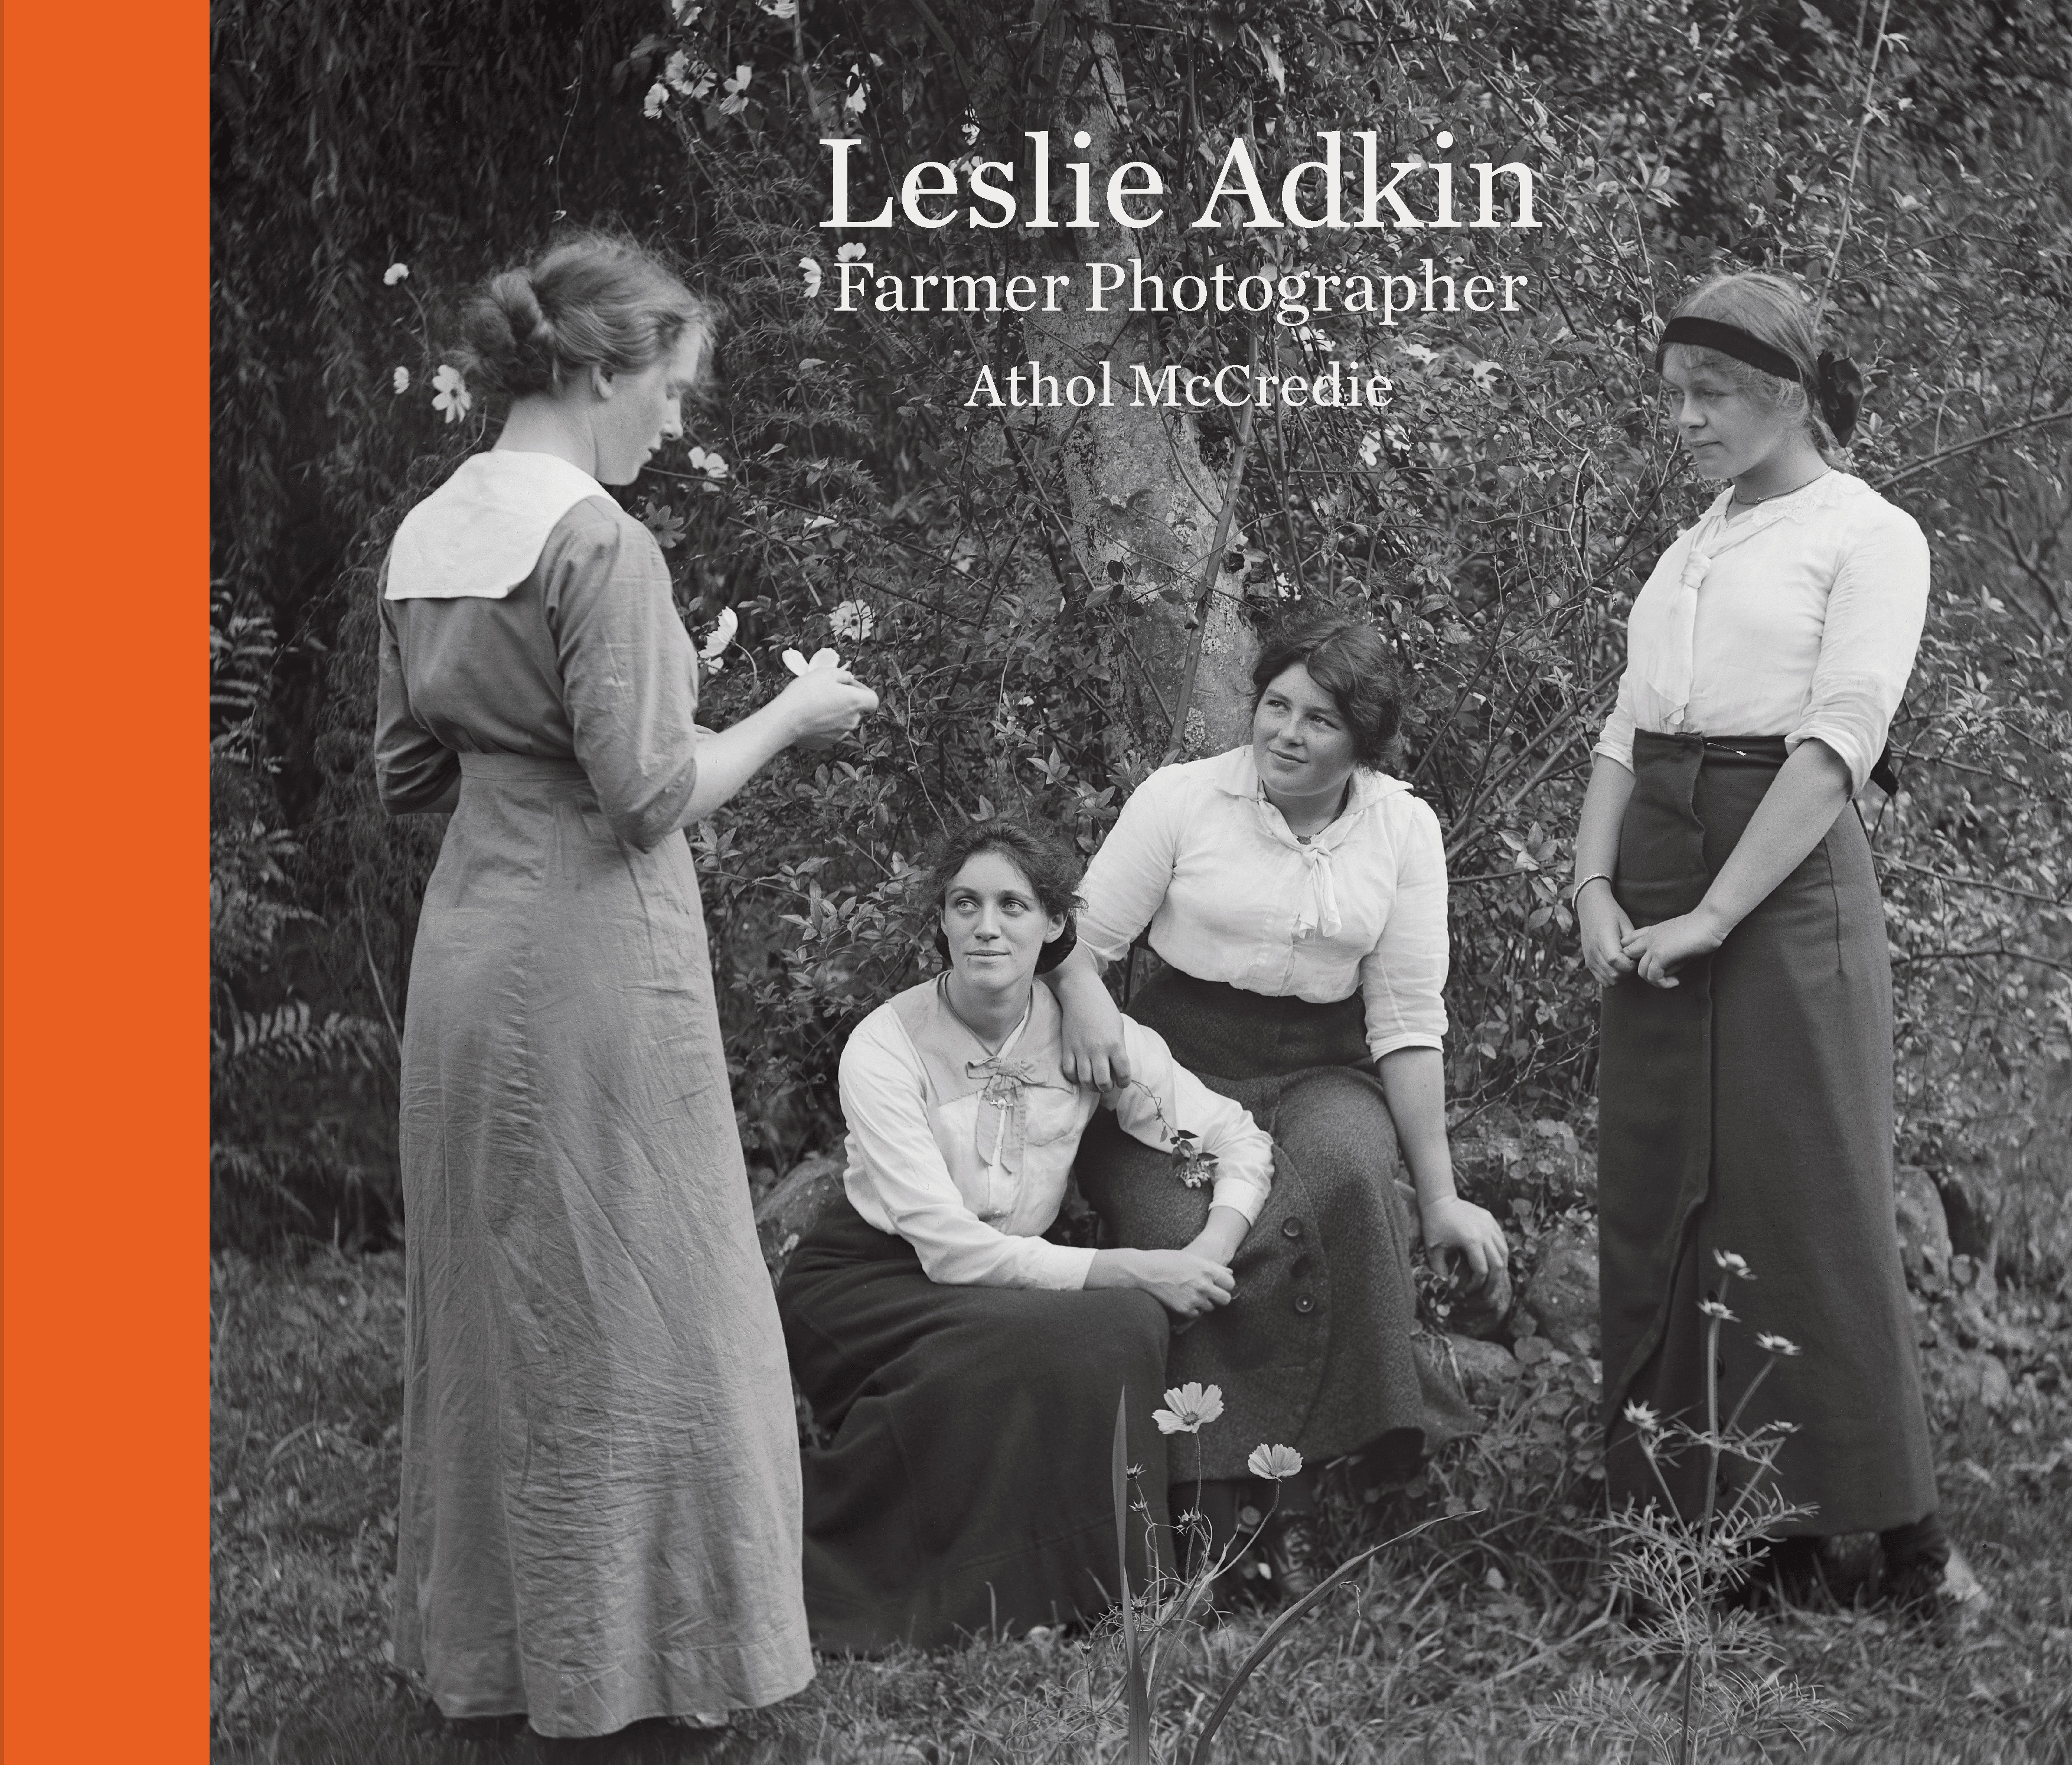 Balck and white photo of four women and the words Leslie Adkin Farmer Photographer Athol McCredie on the top middle